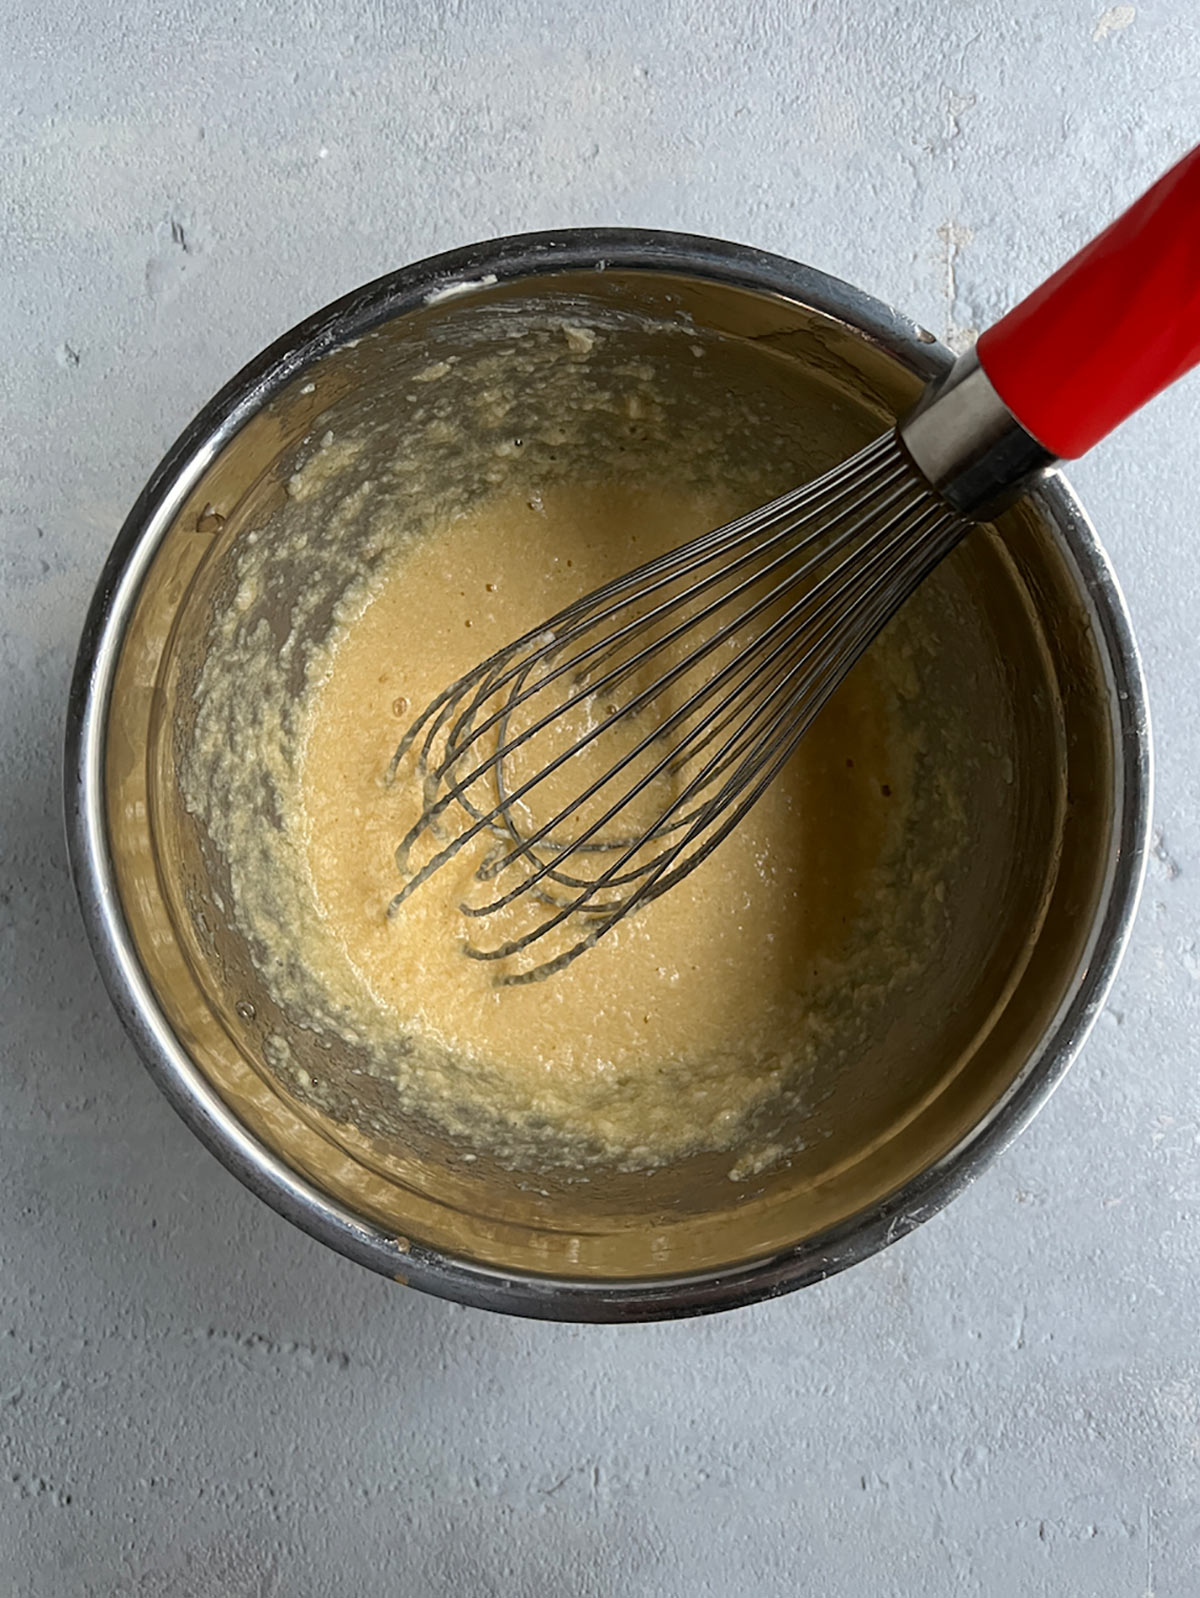 Mix eggs into creamed butter and sugar.